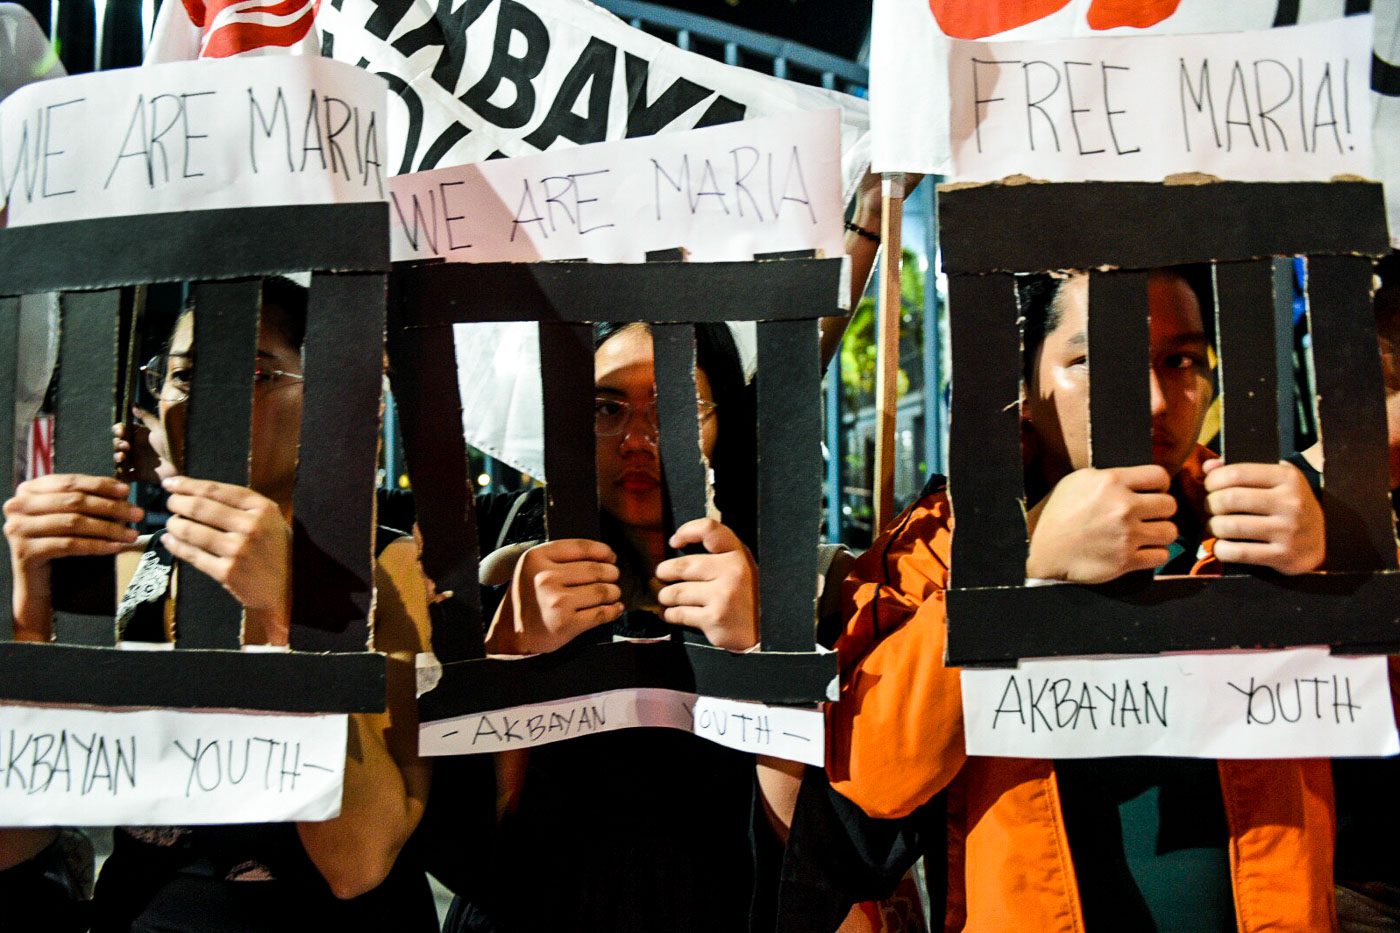 WE ARE MARIA. Students and rights activists picket the NBI headquarters in Manila where Rappler CEO and executive editor Maria Ressa is detained following her arrest for the charge of cyberlibel on February 13, 2019. Photo by LeAnne Jazul/Rappler   